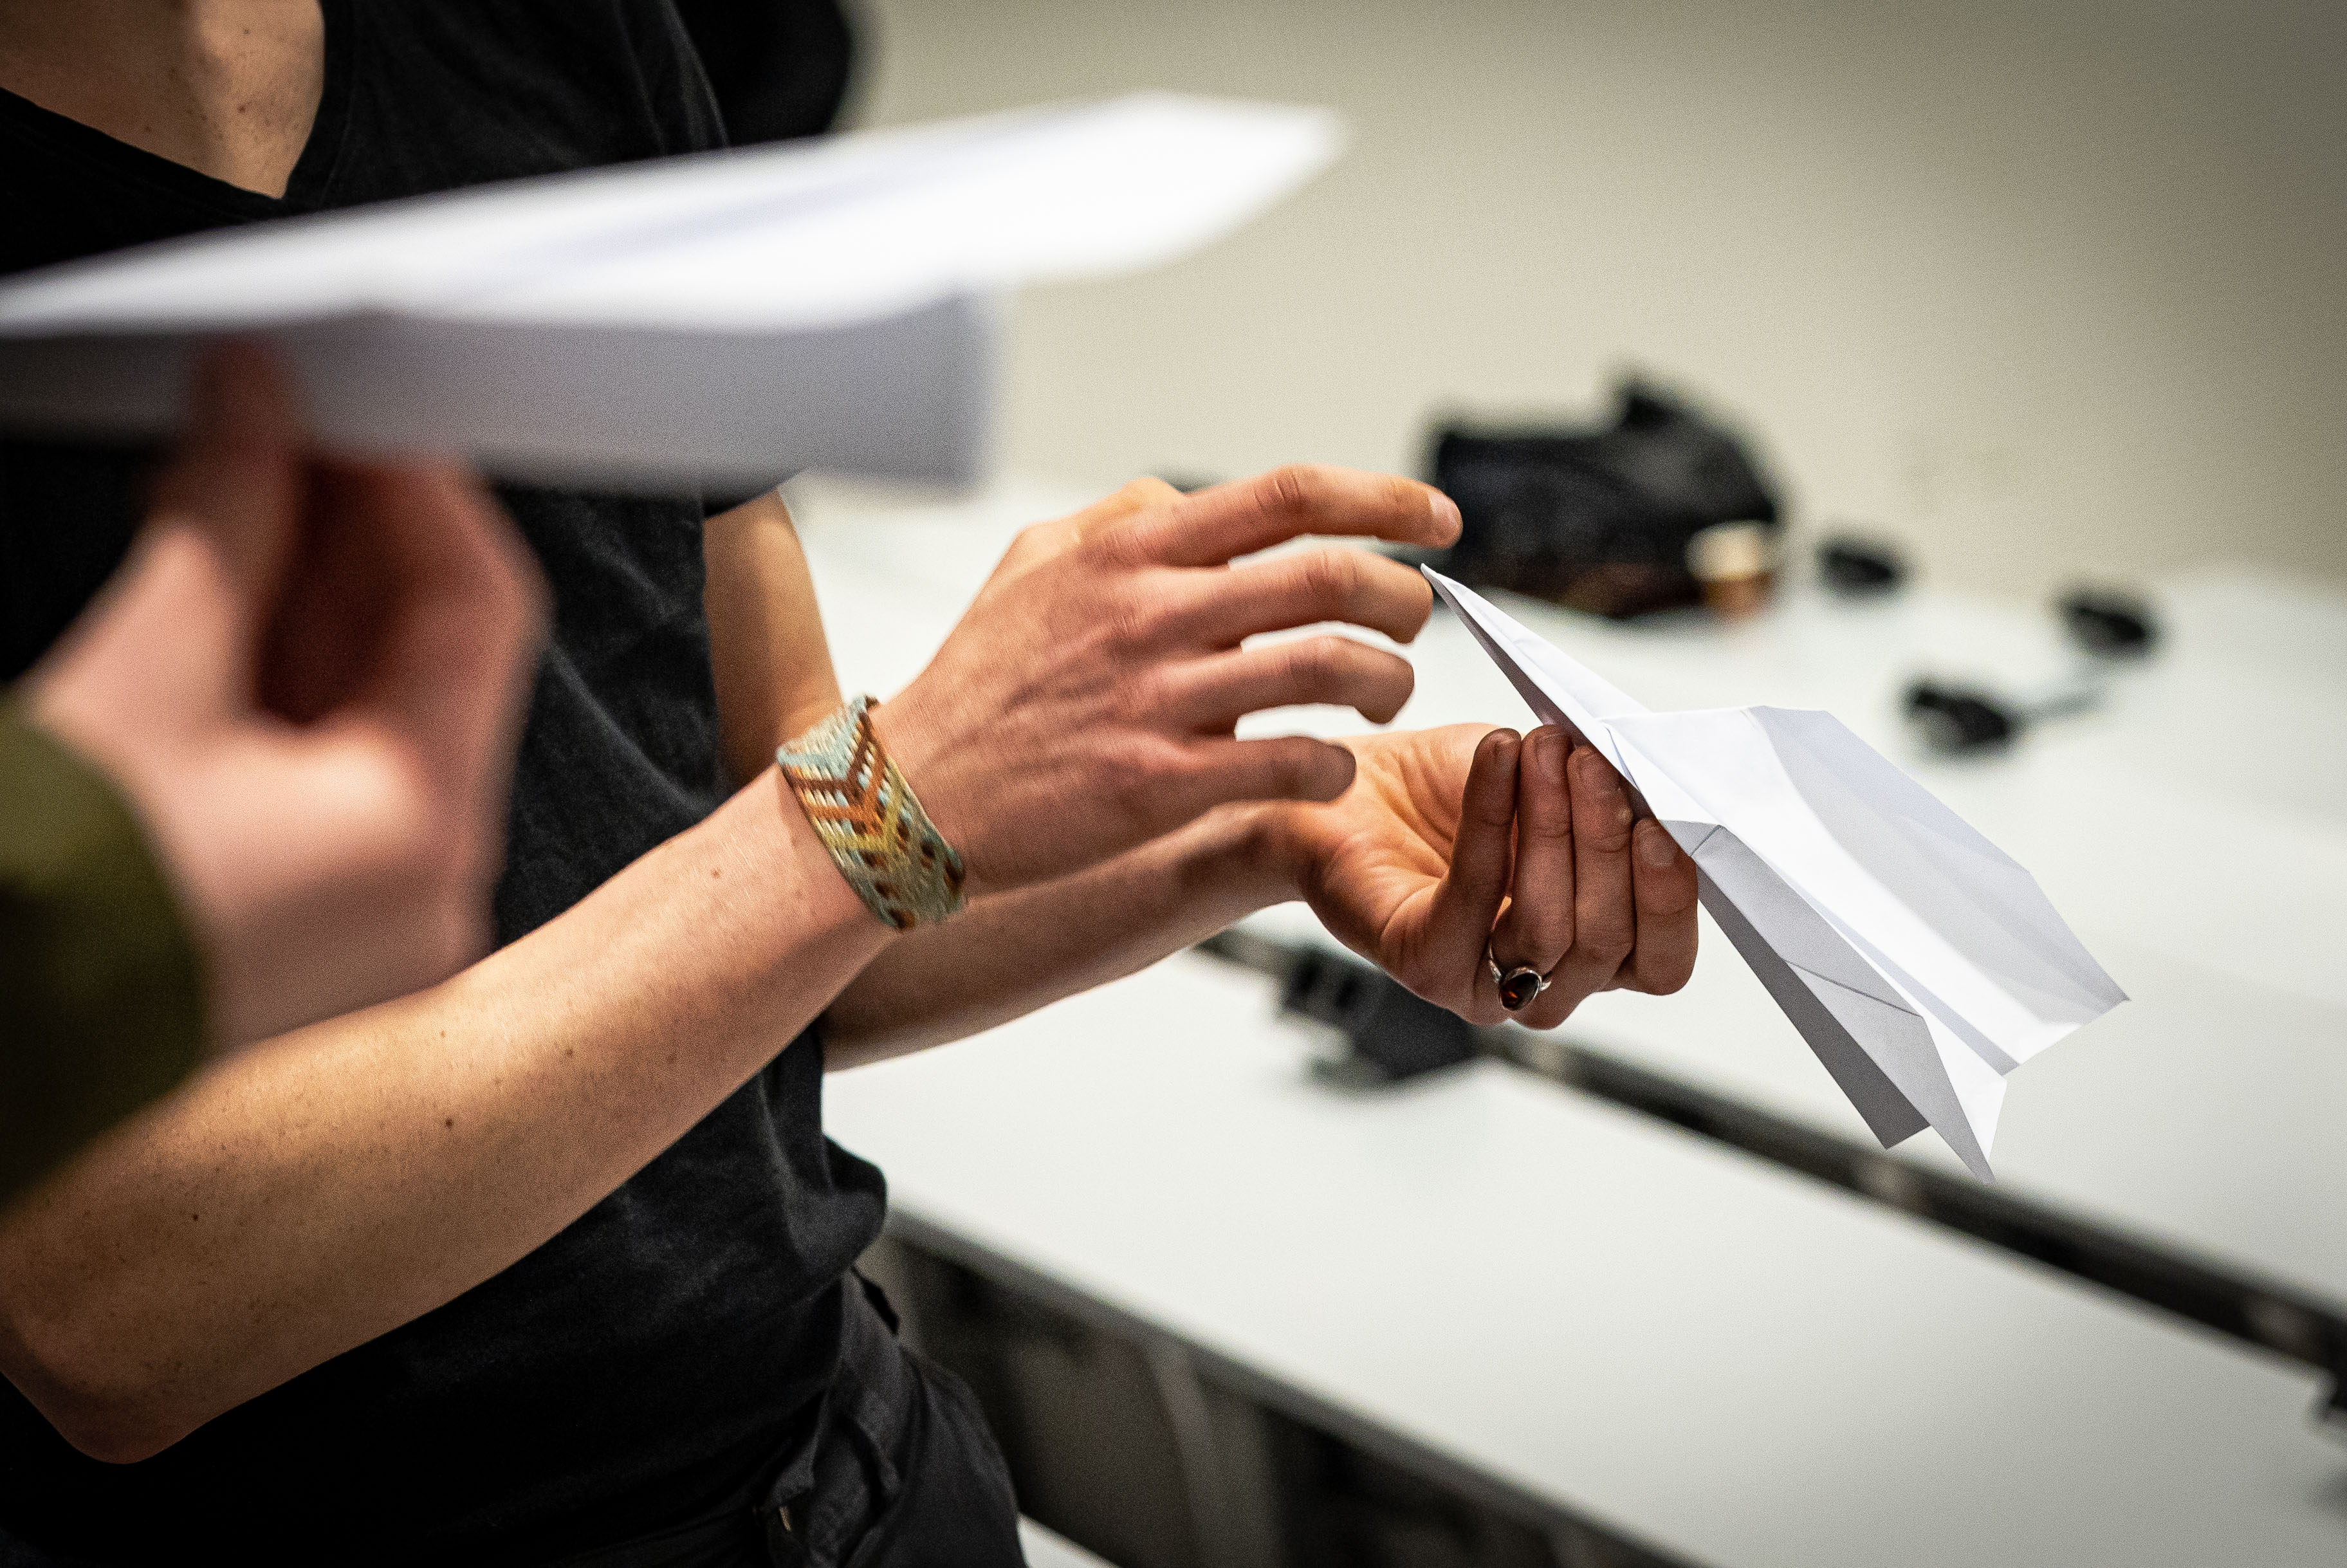 The point of a paper airplane is being improved | Image by Leoni von Ristok